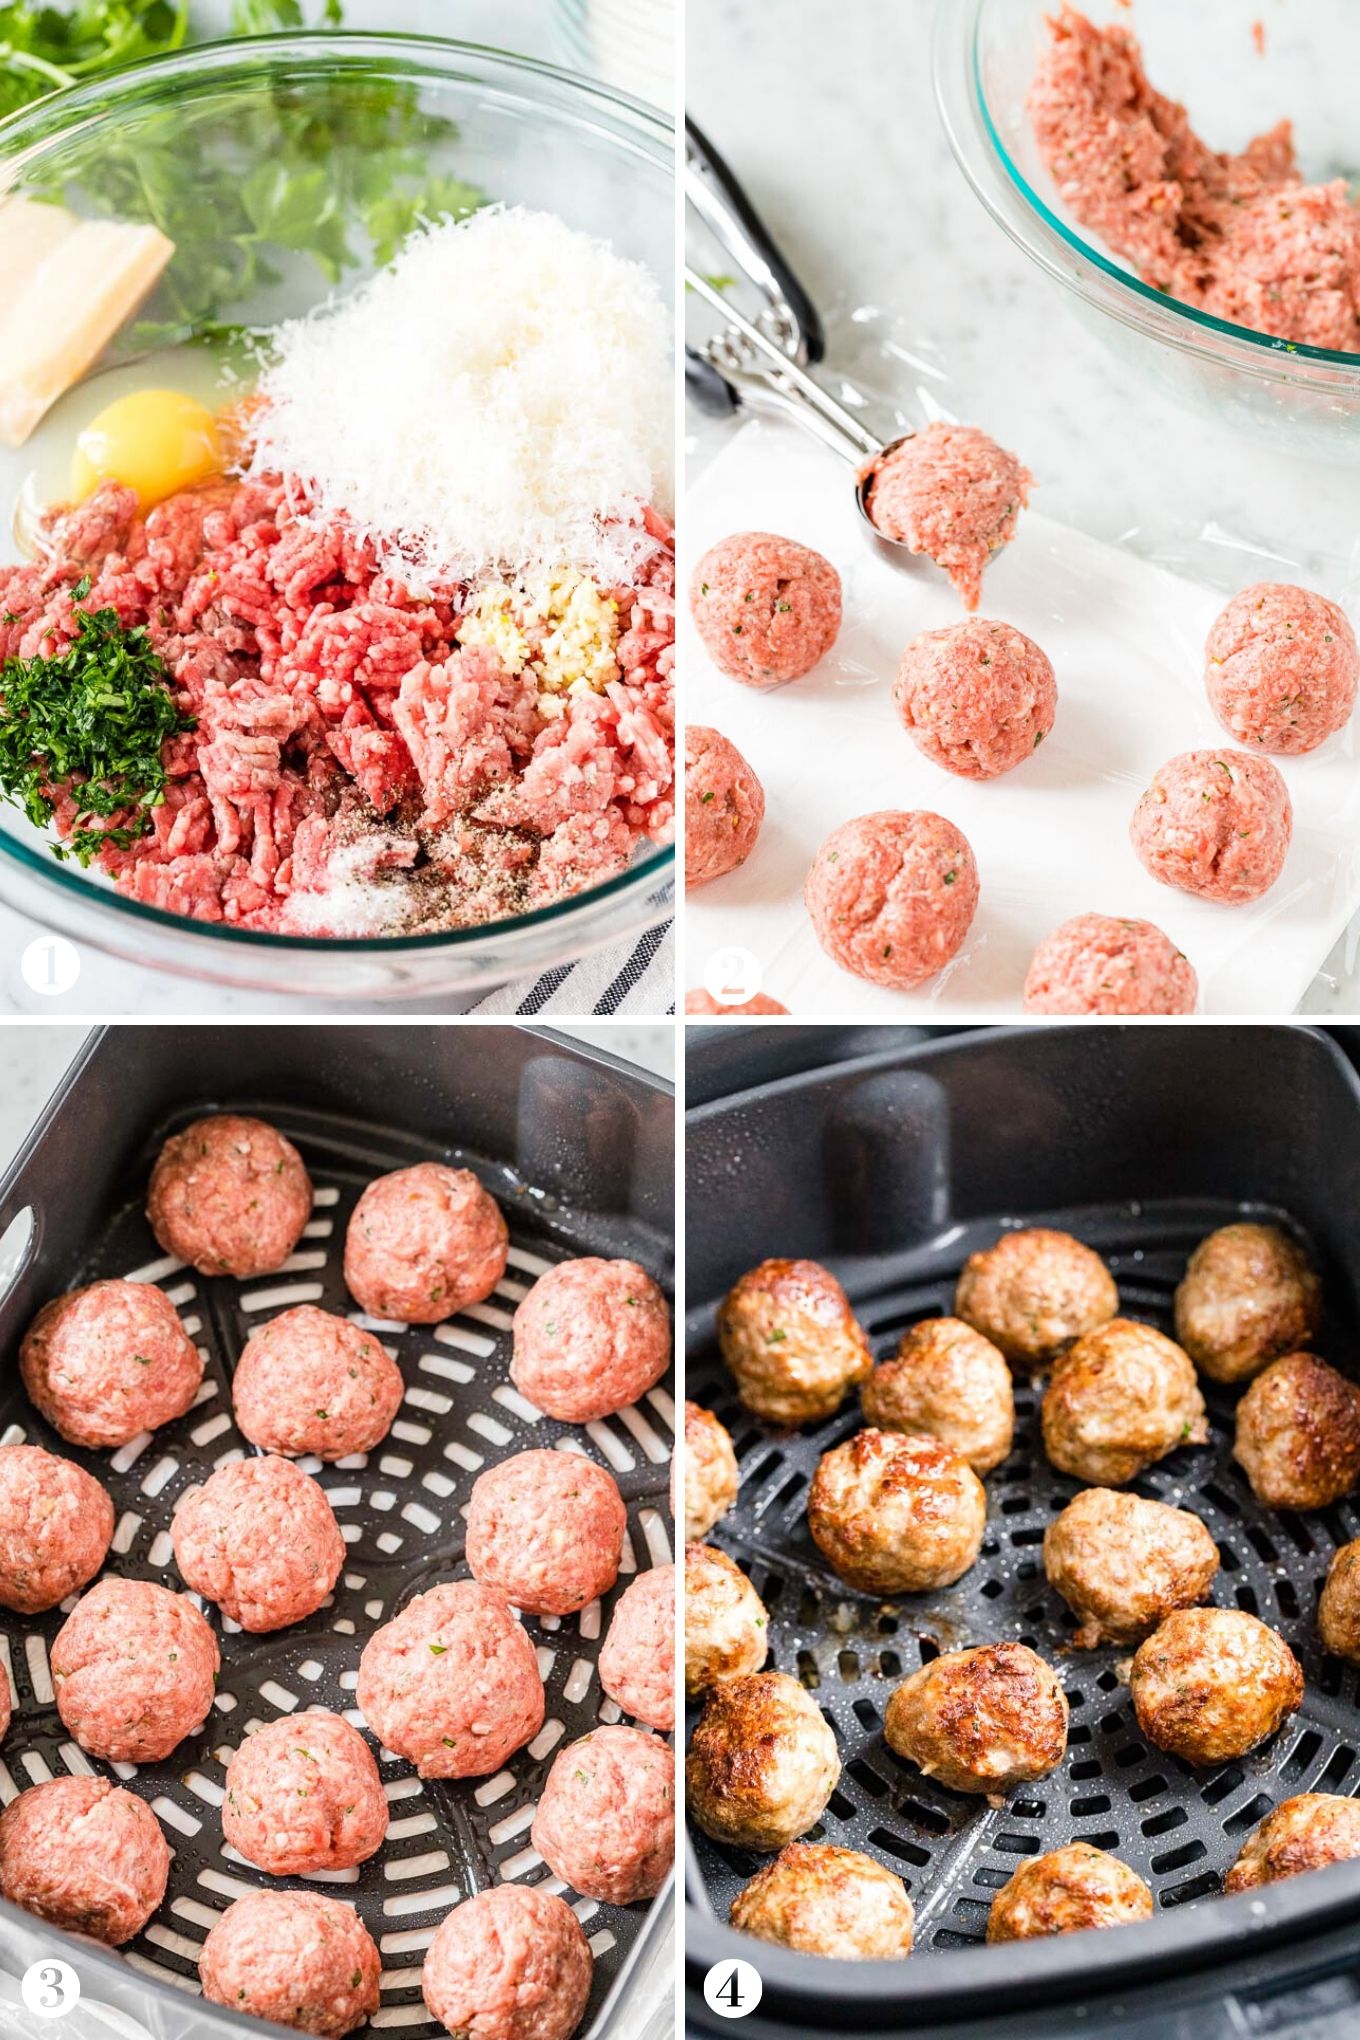 How to make Air Fryer Meatballs